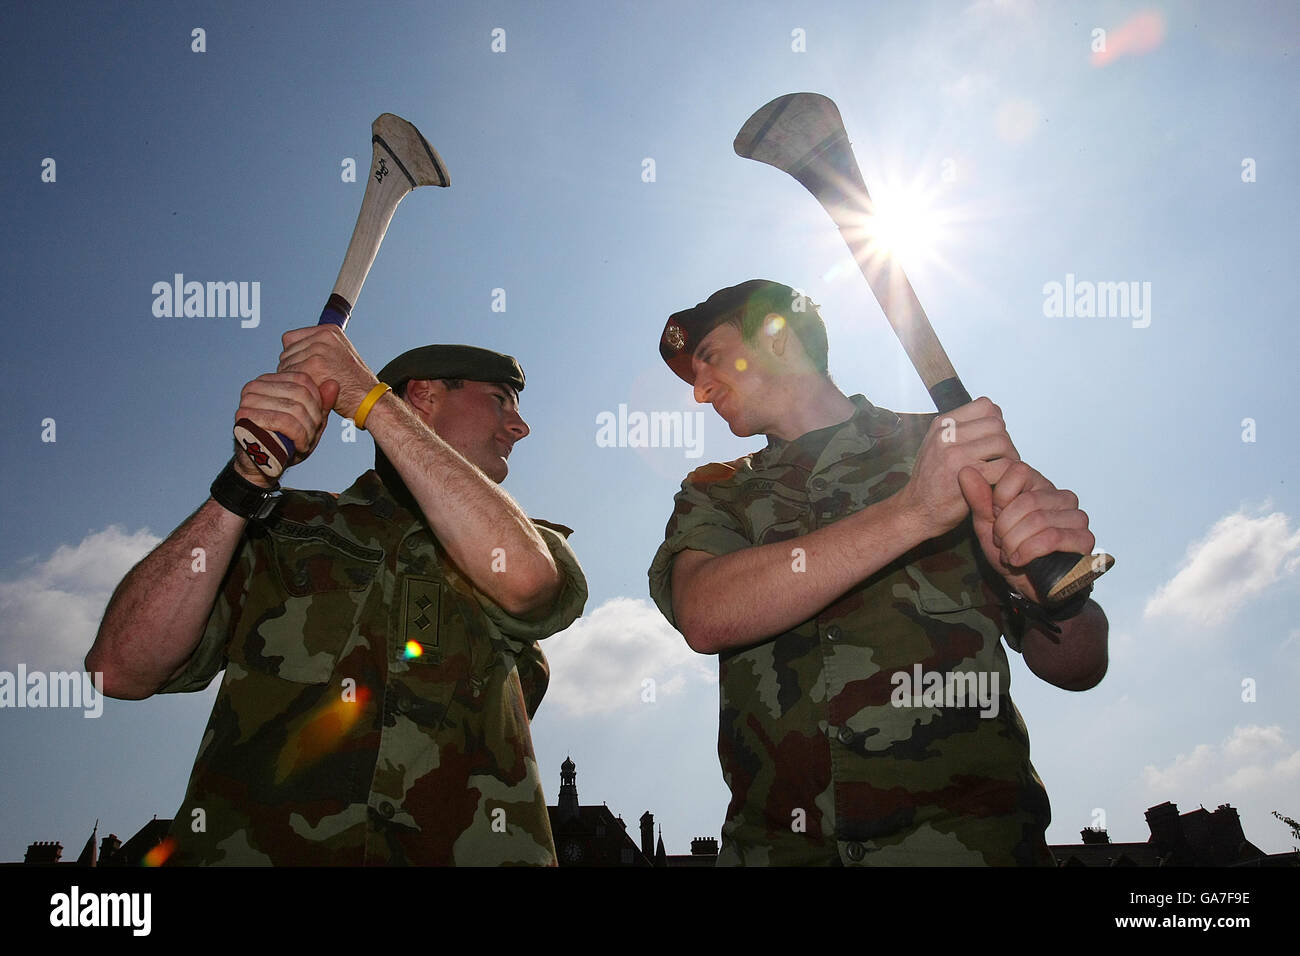 Two members of the Irish Defense forces Lieutenant Andrew Shaughnessey (1st Cavalry Squadron) from Kilmallock, Limerick (left) squares against Private Eoin Larkin (3rd Infantry Battalion Kilkenny) from James Stephens Club Kilkenny in McKee Barracks where they will face each other on the first Sunday in September in Croke Park in the All Ireland Hurling Final. Stock Photo